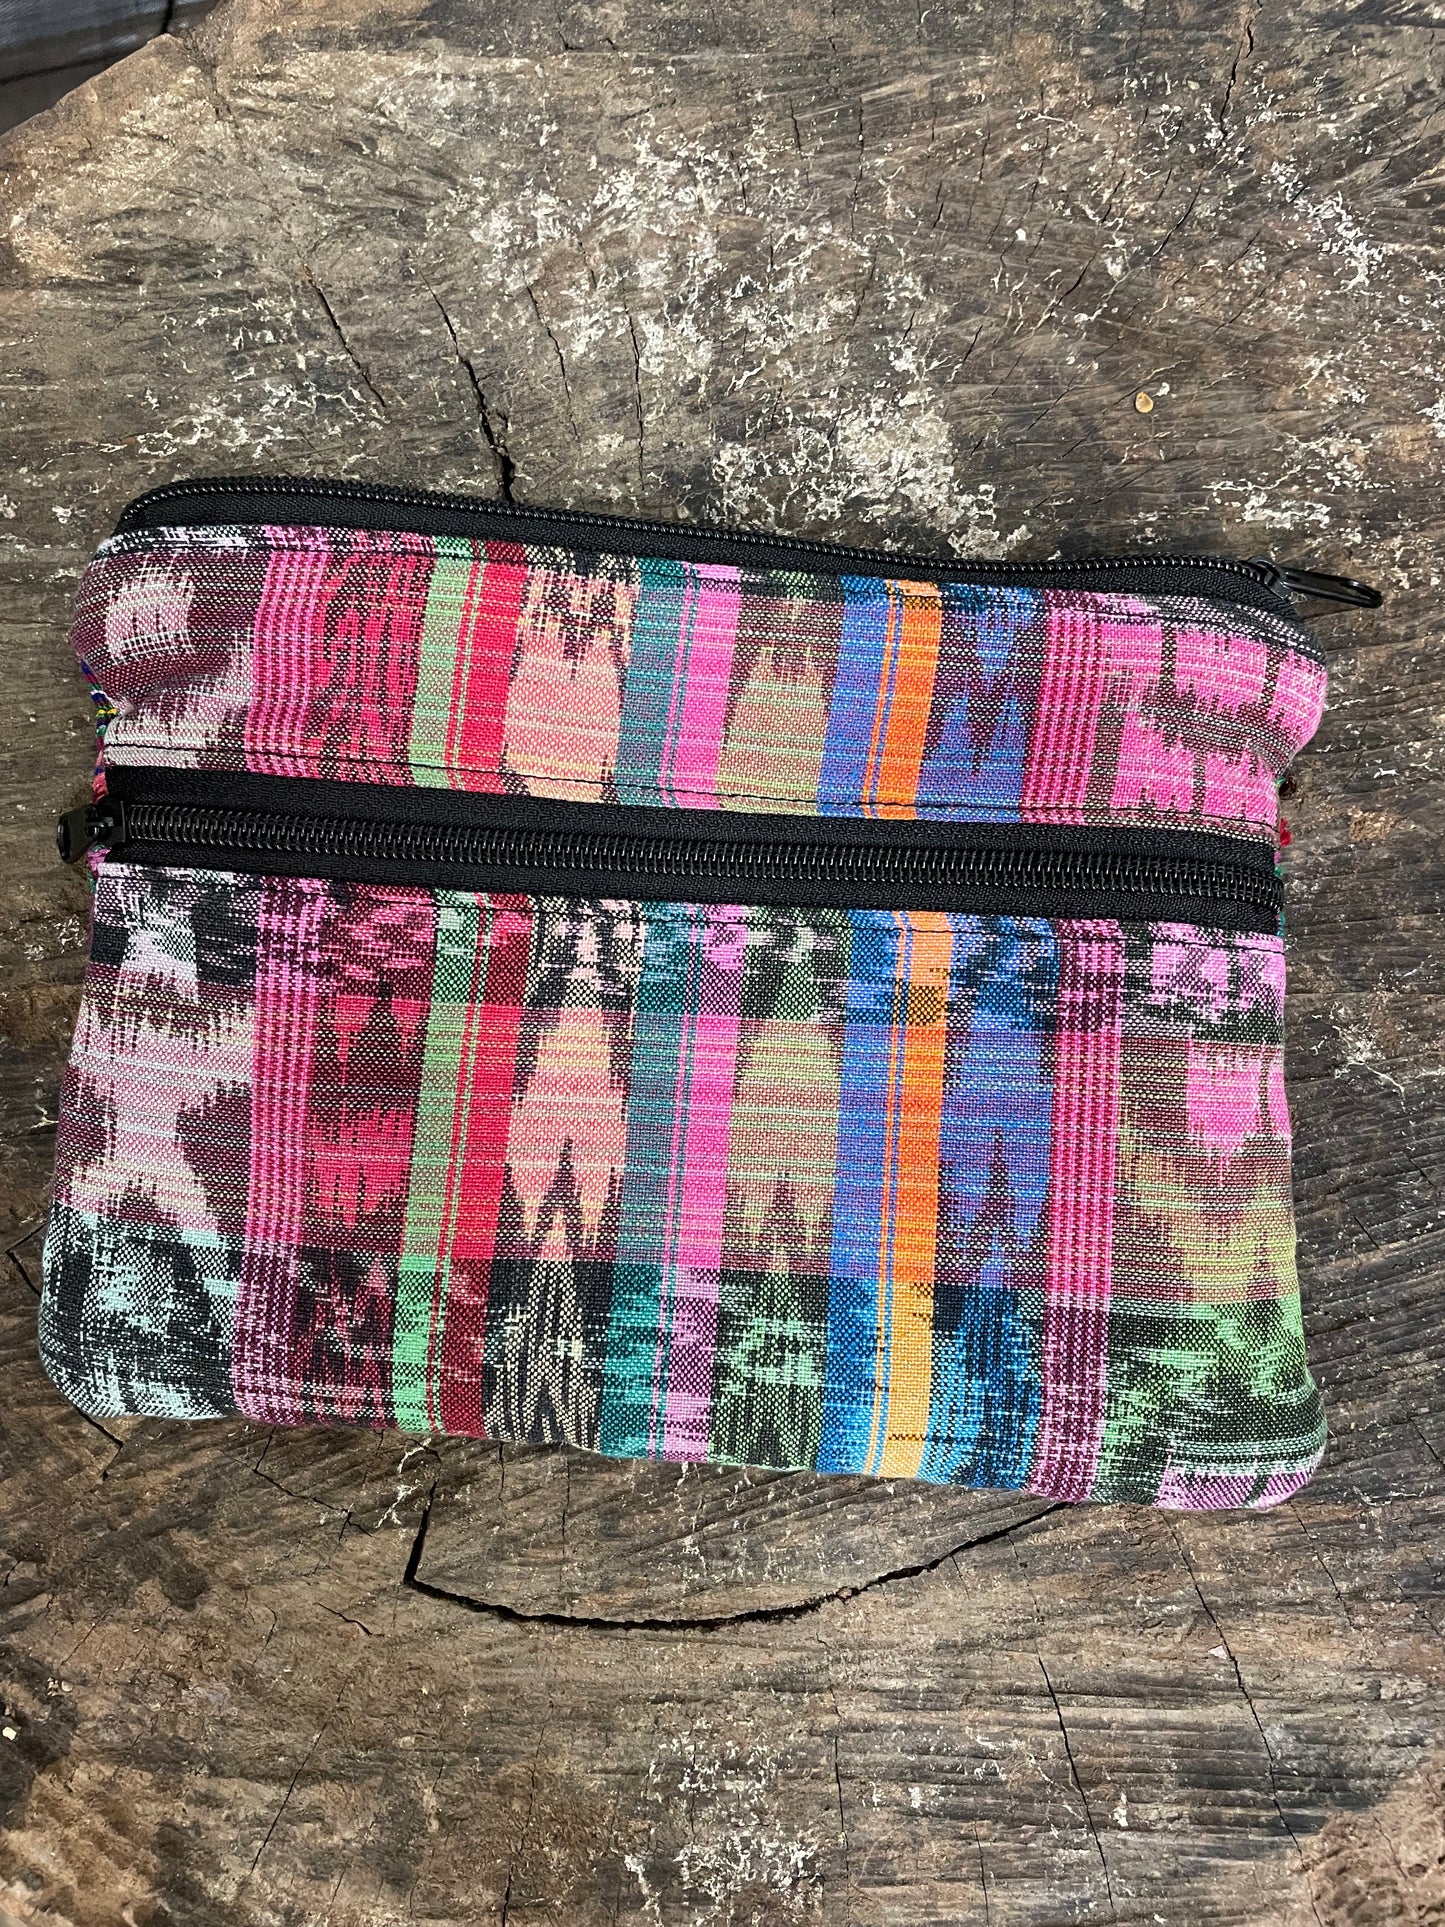 Guatemalan Huipil cosmetic pouch from Nebaj Quiche